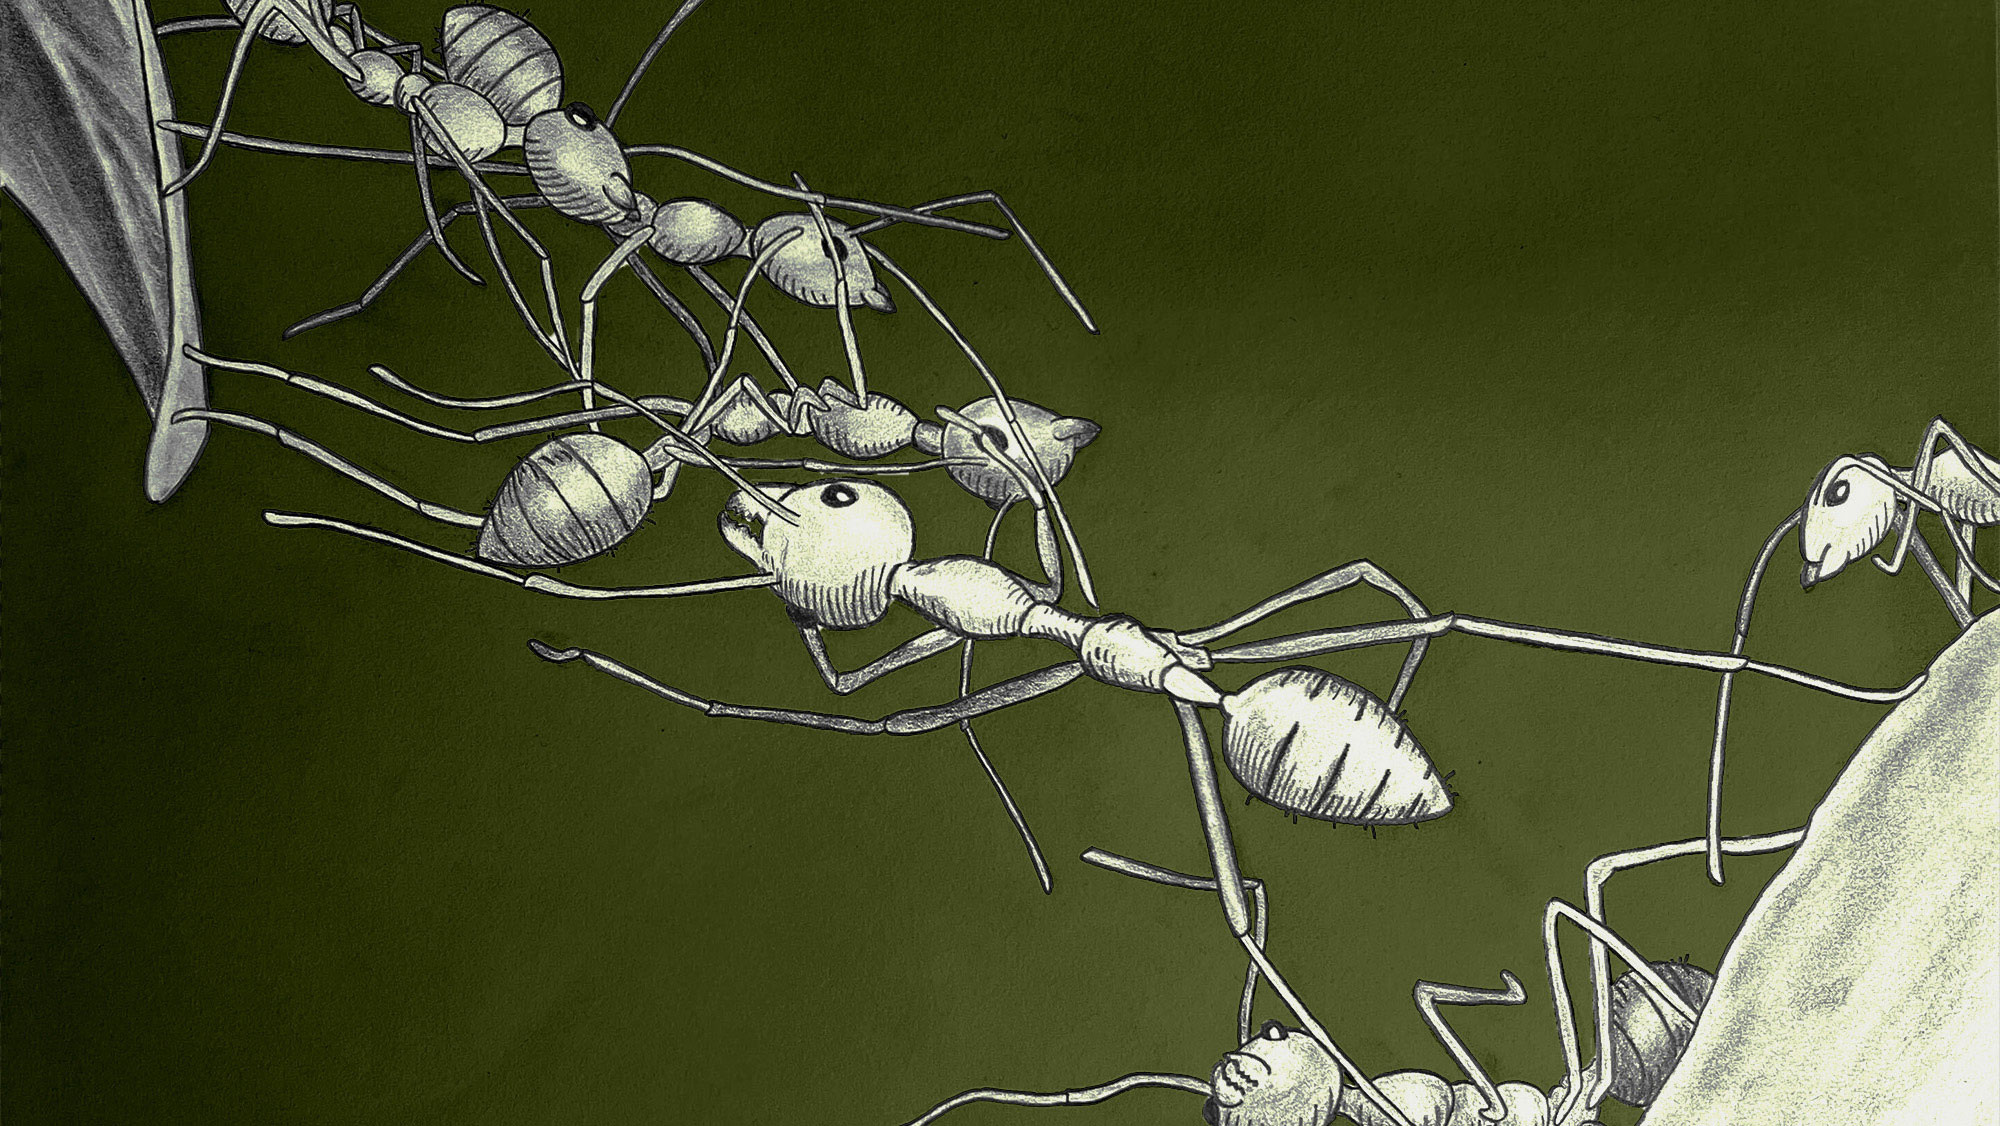 An illustration showing ants creating a bridge with their bodies with a green background.